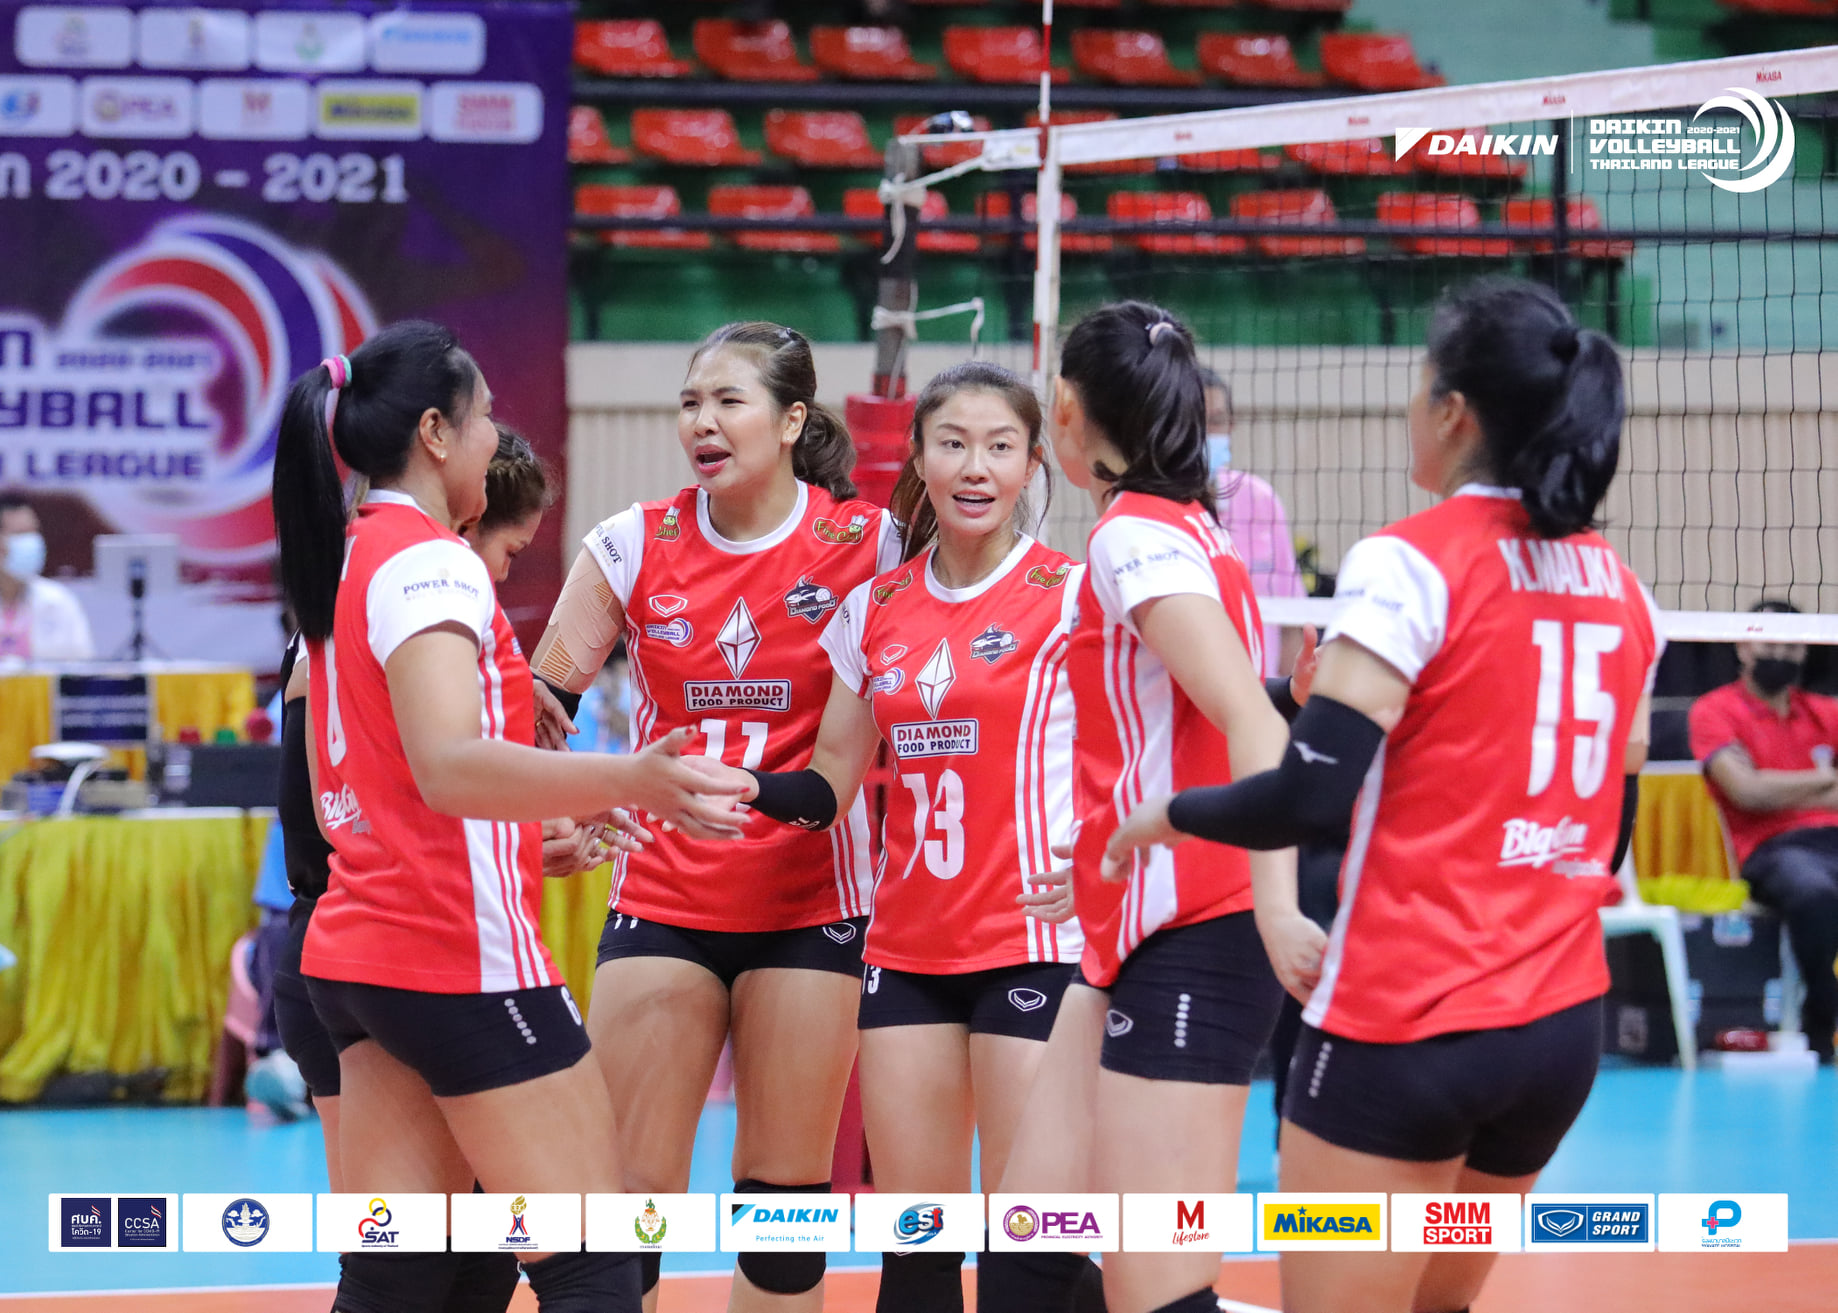 DIAMOND FOOD, NAKHON RATCHASIMA KEEP TITLE CHALLENGES ON COURSE IN THAILAND LEAGUE